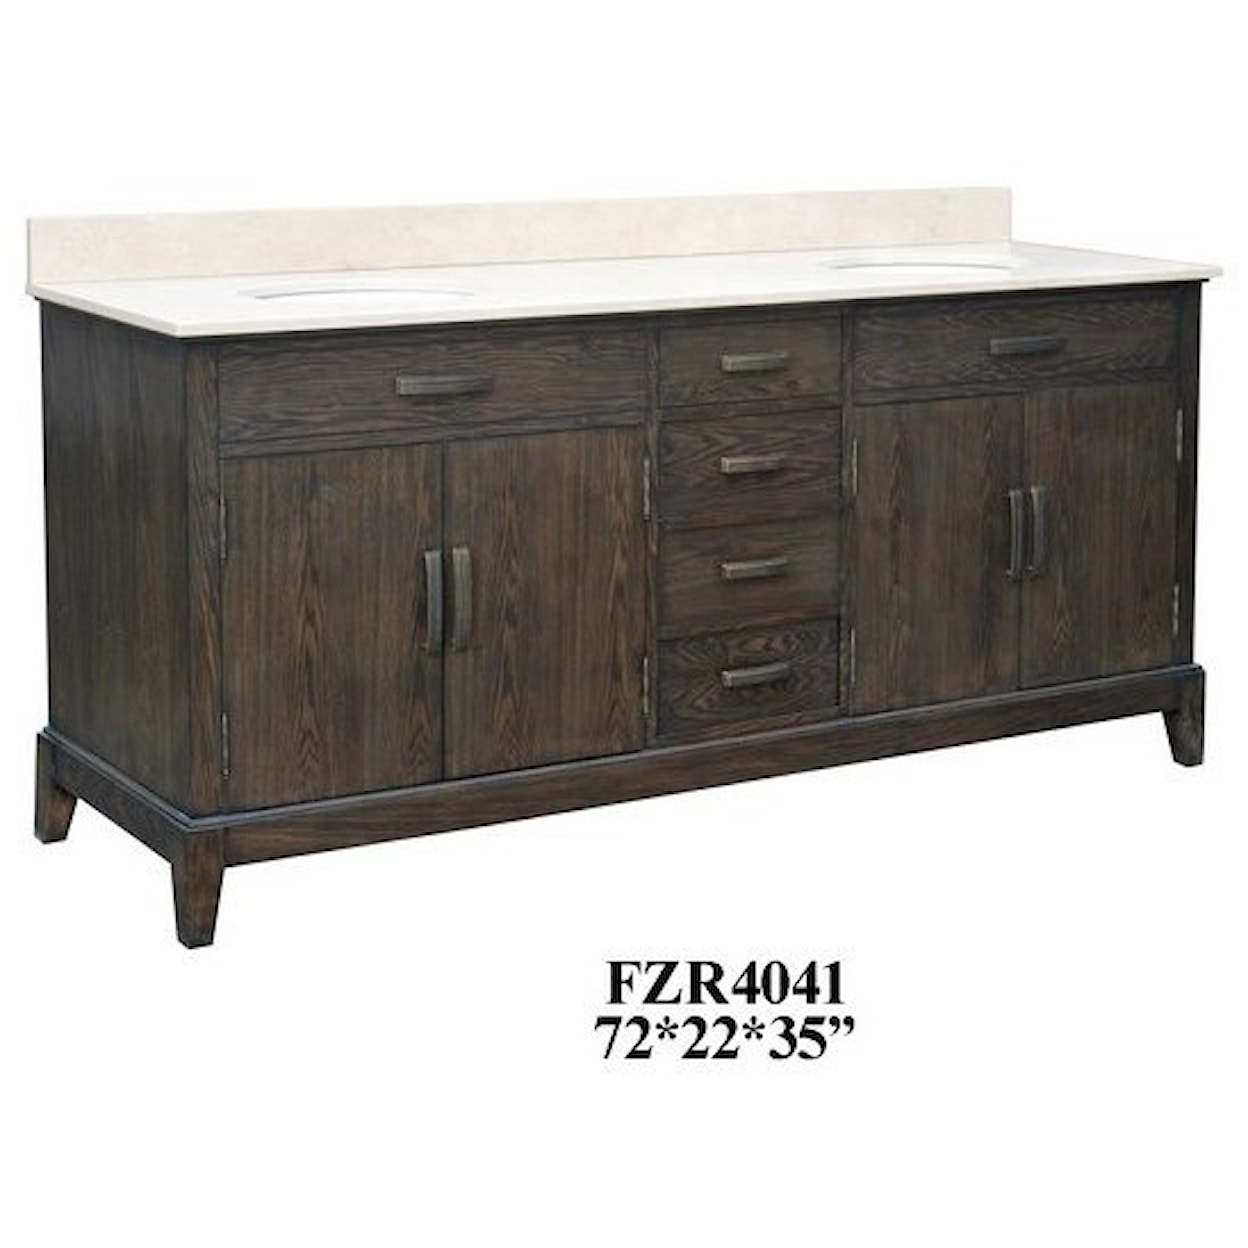 Crestview Collection Accent Furniture 4 Drawer Double Vanity Sink